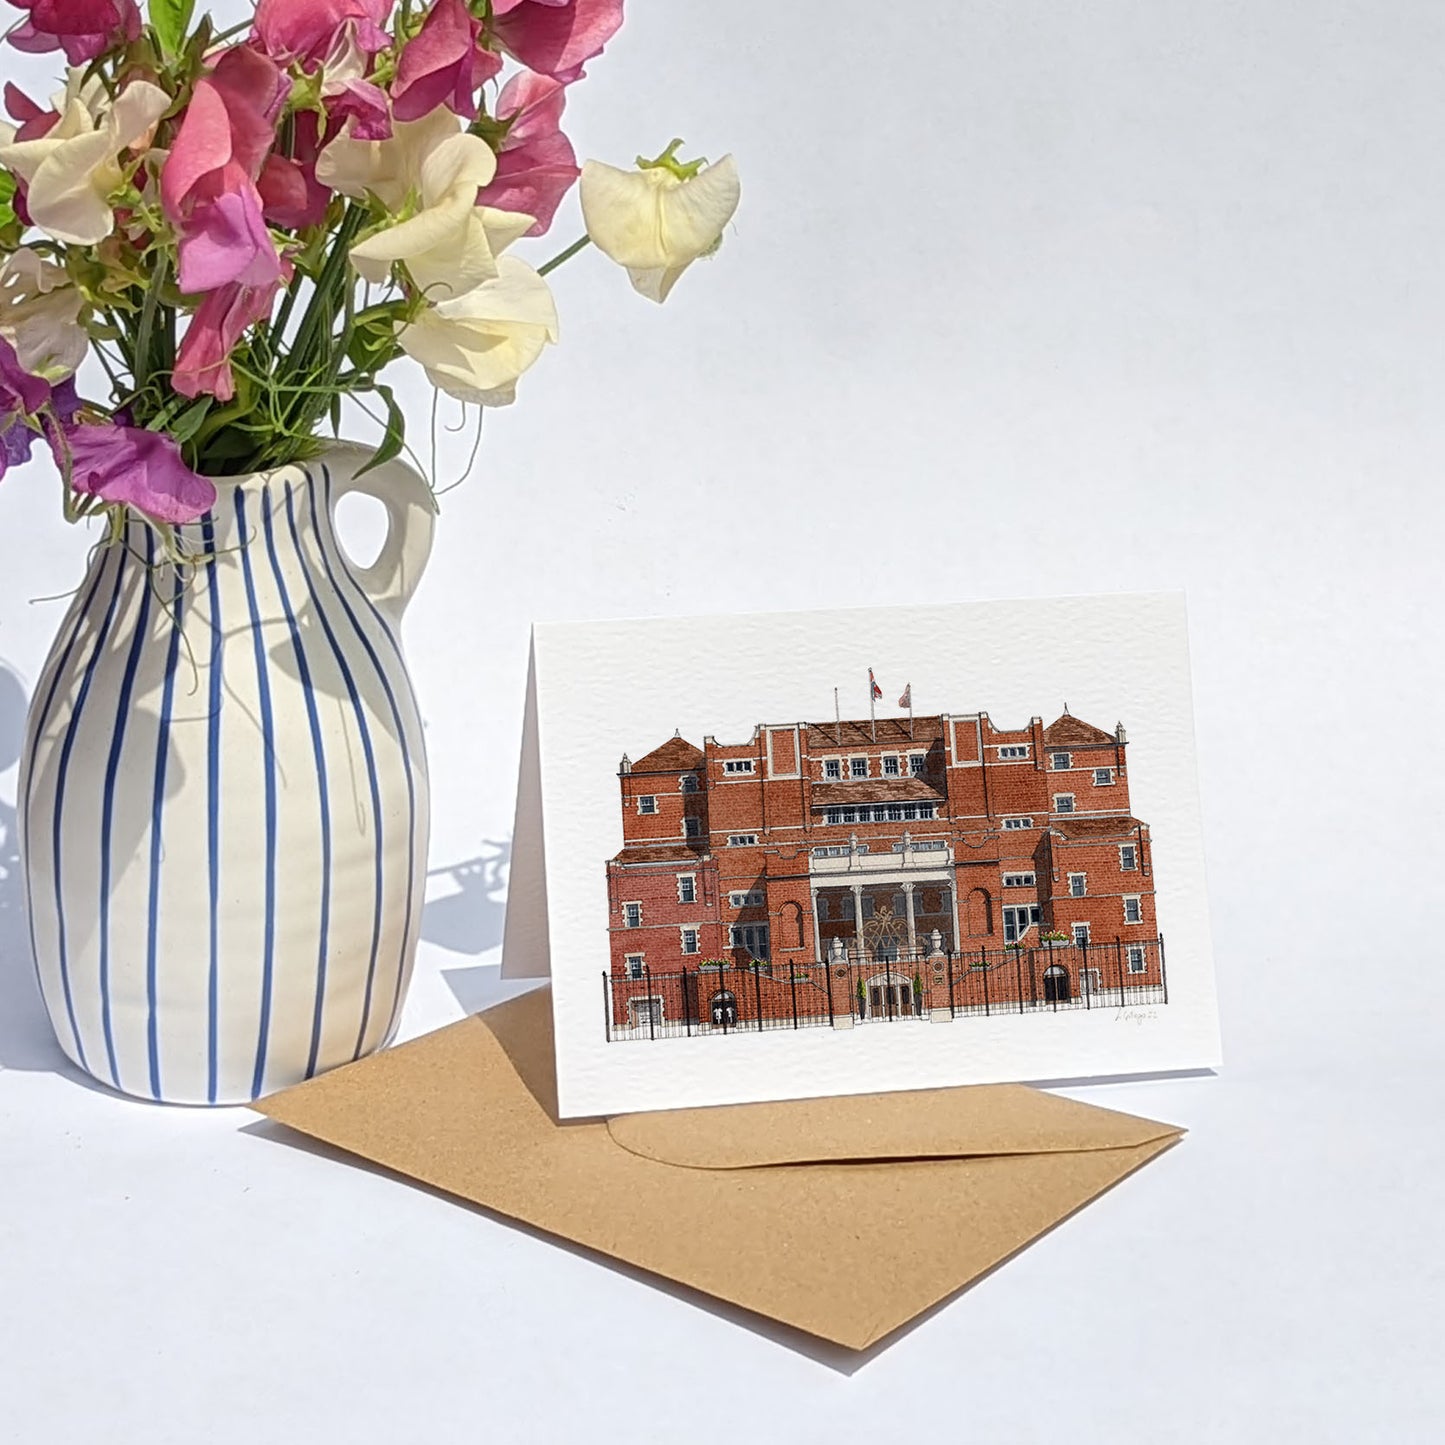 Oval - Oval Pavillion - Greeting card with envelope